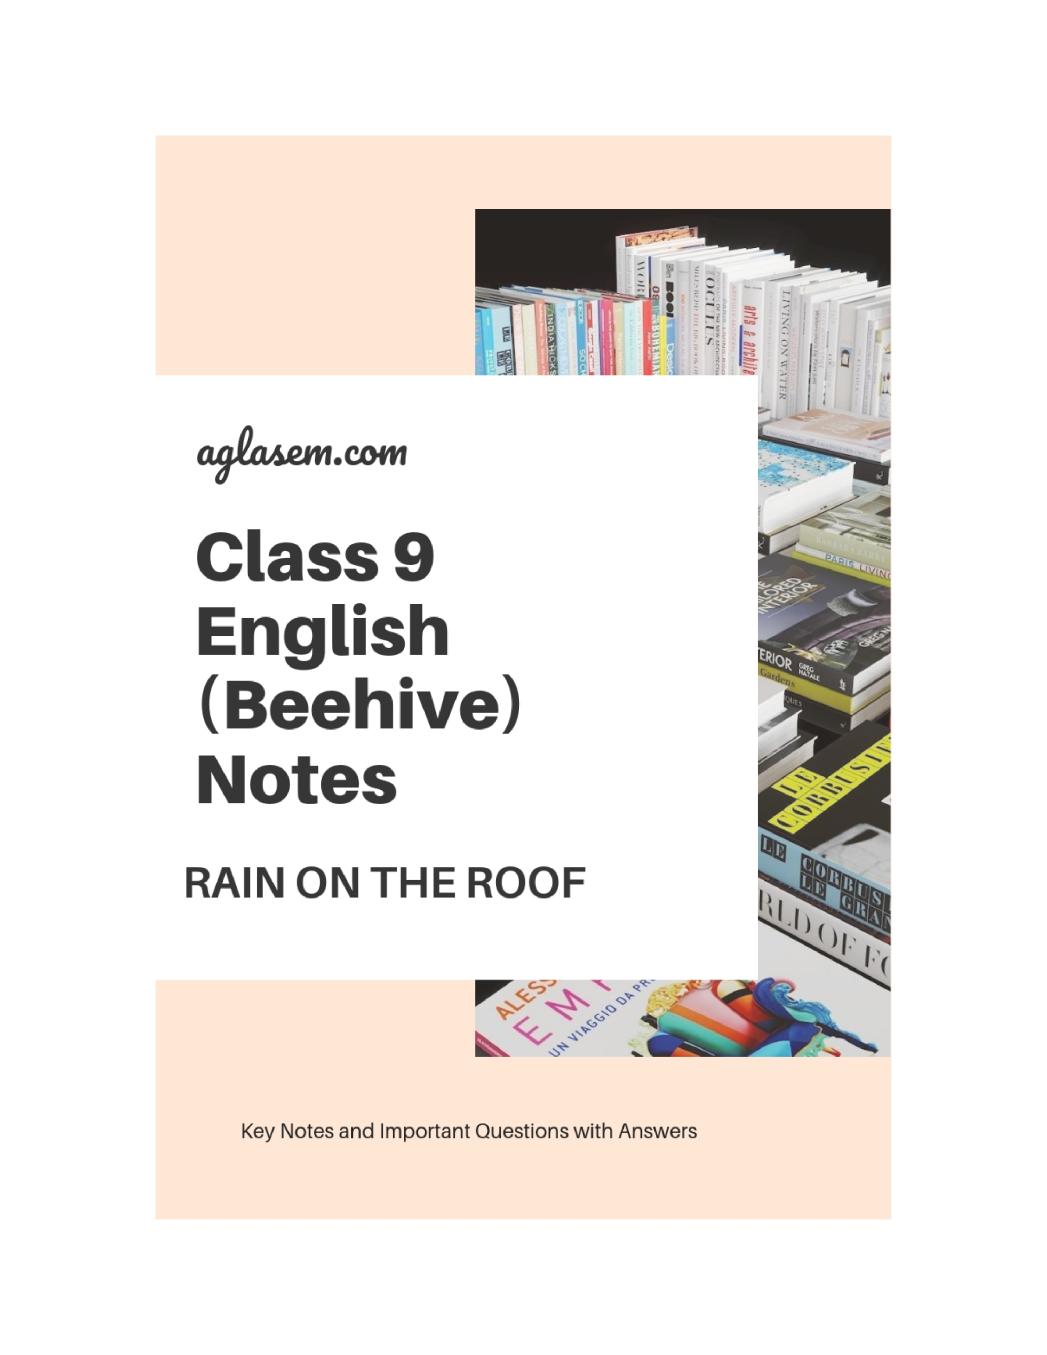 Class 9 English Beehive Notes For Rain on the Roof - Page 1